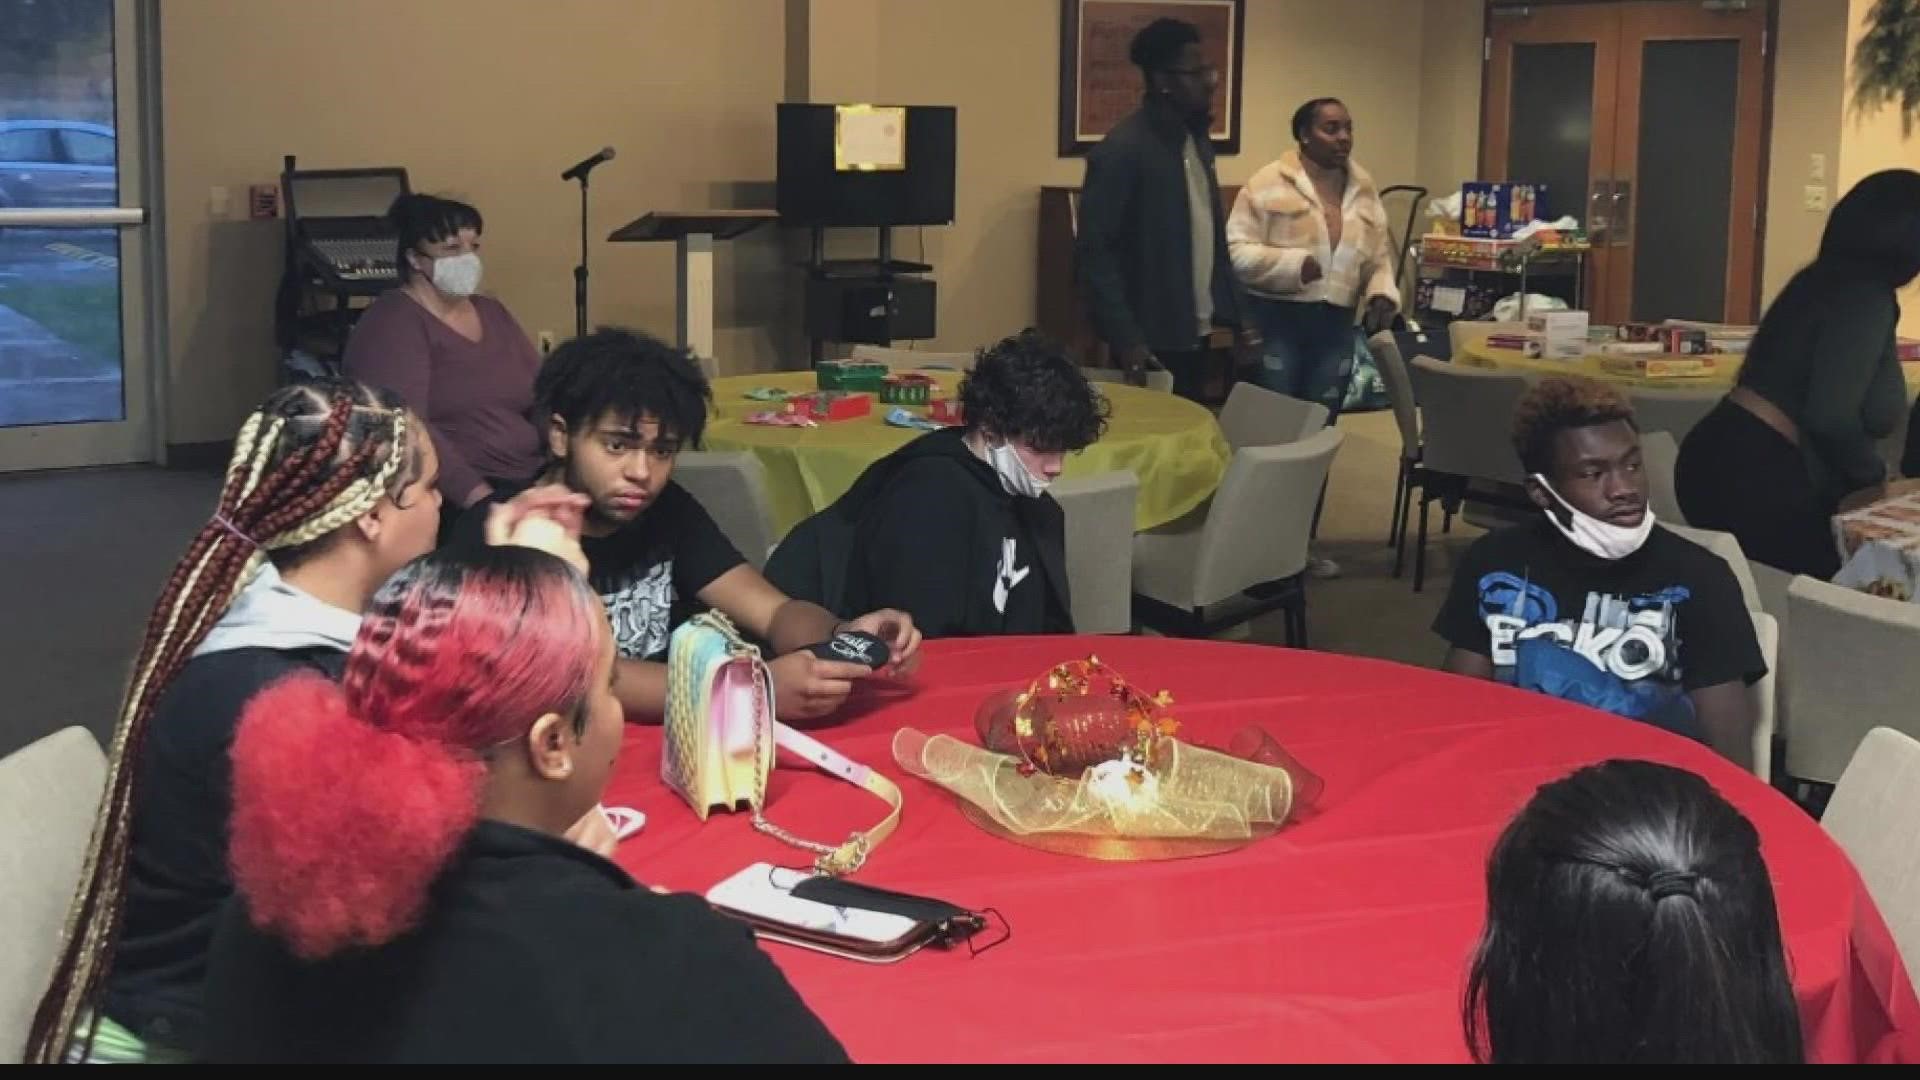 This year, Foster Success will host its third annual Friendsgiving, bringing young people in the foster care system together to share a meal and time with each other